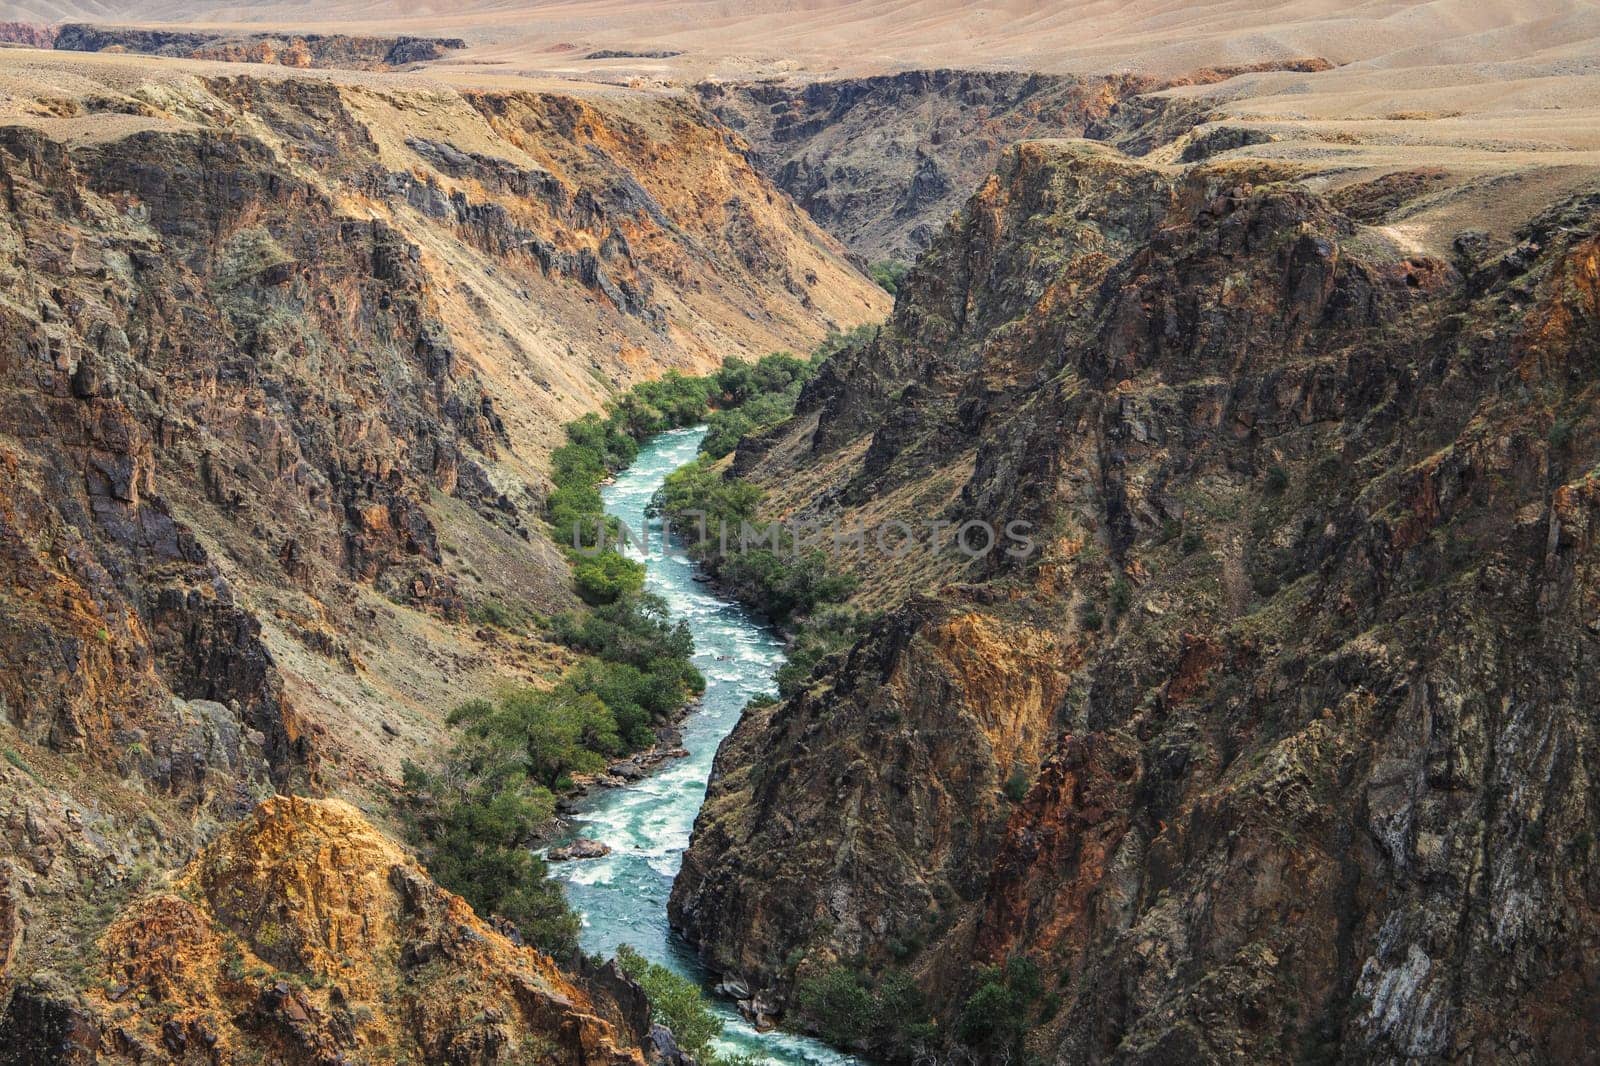 Upper part of the Charyn River, which flows through the Charyn Canyon in Kazakhstan in the Almaty region.